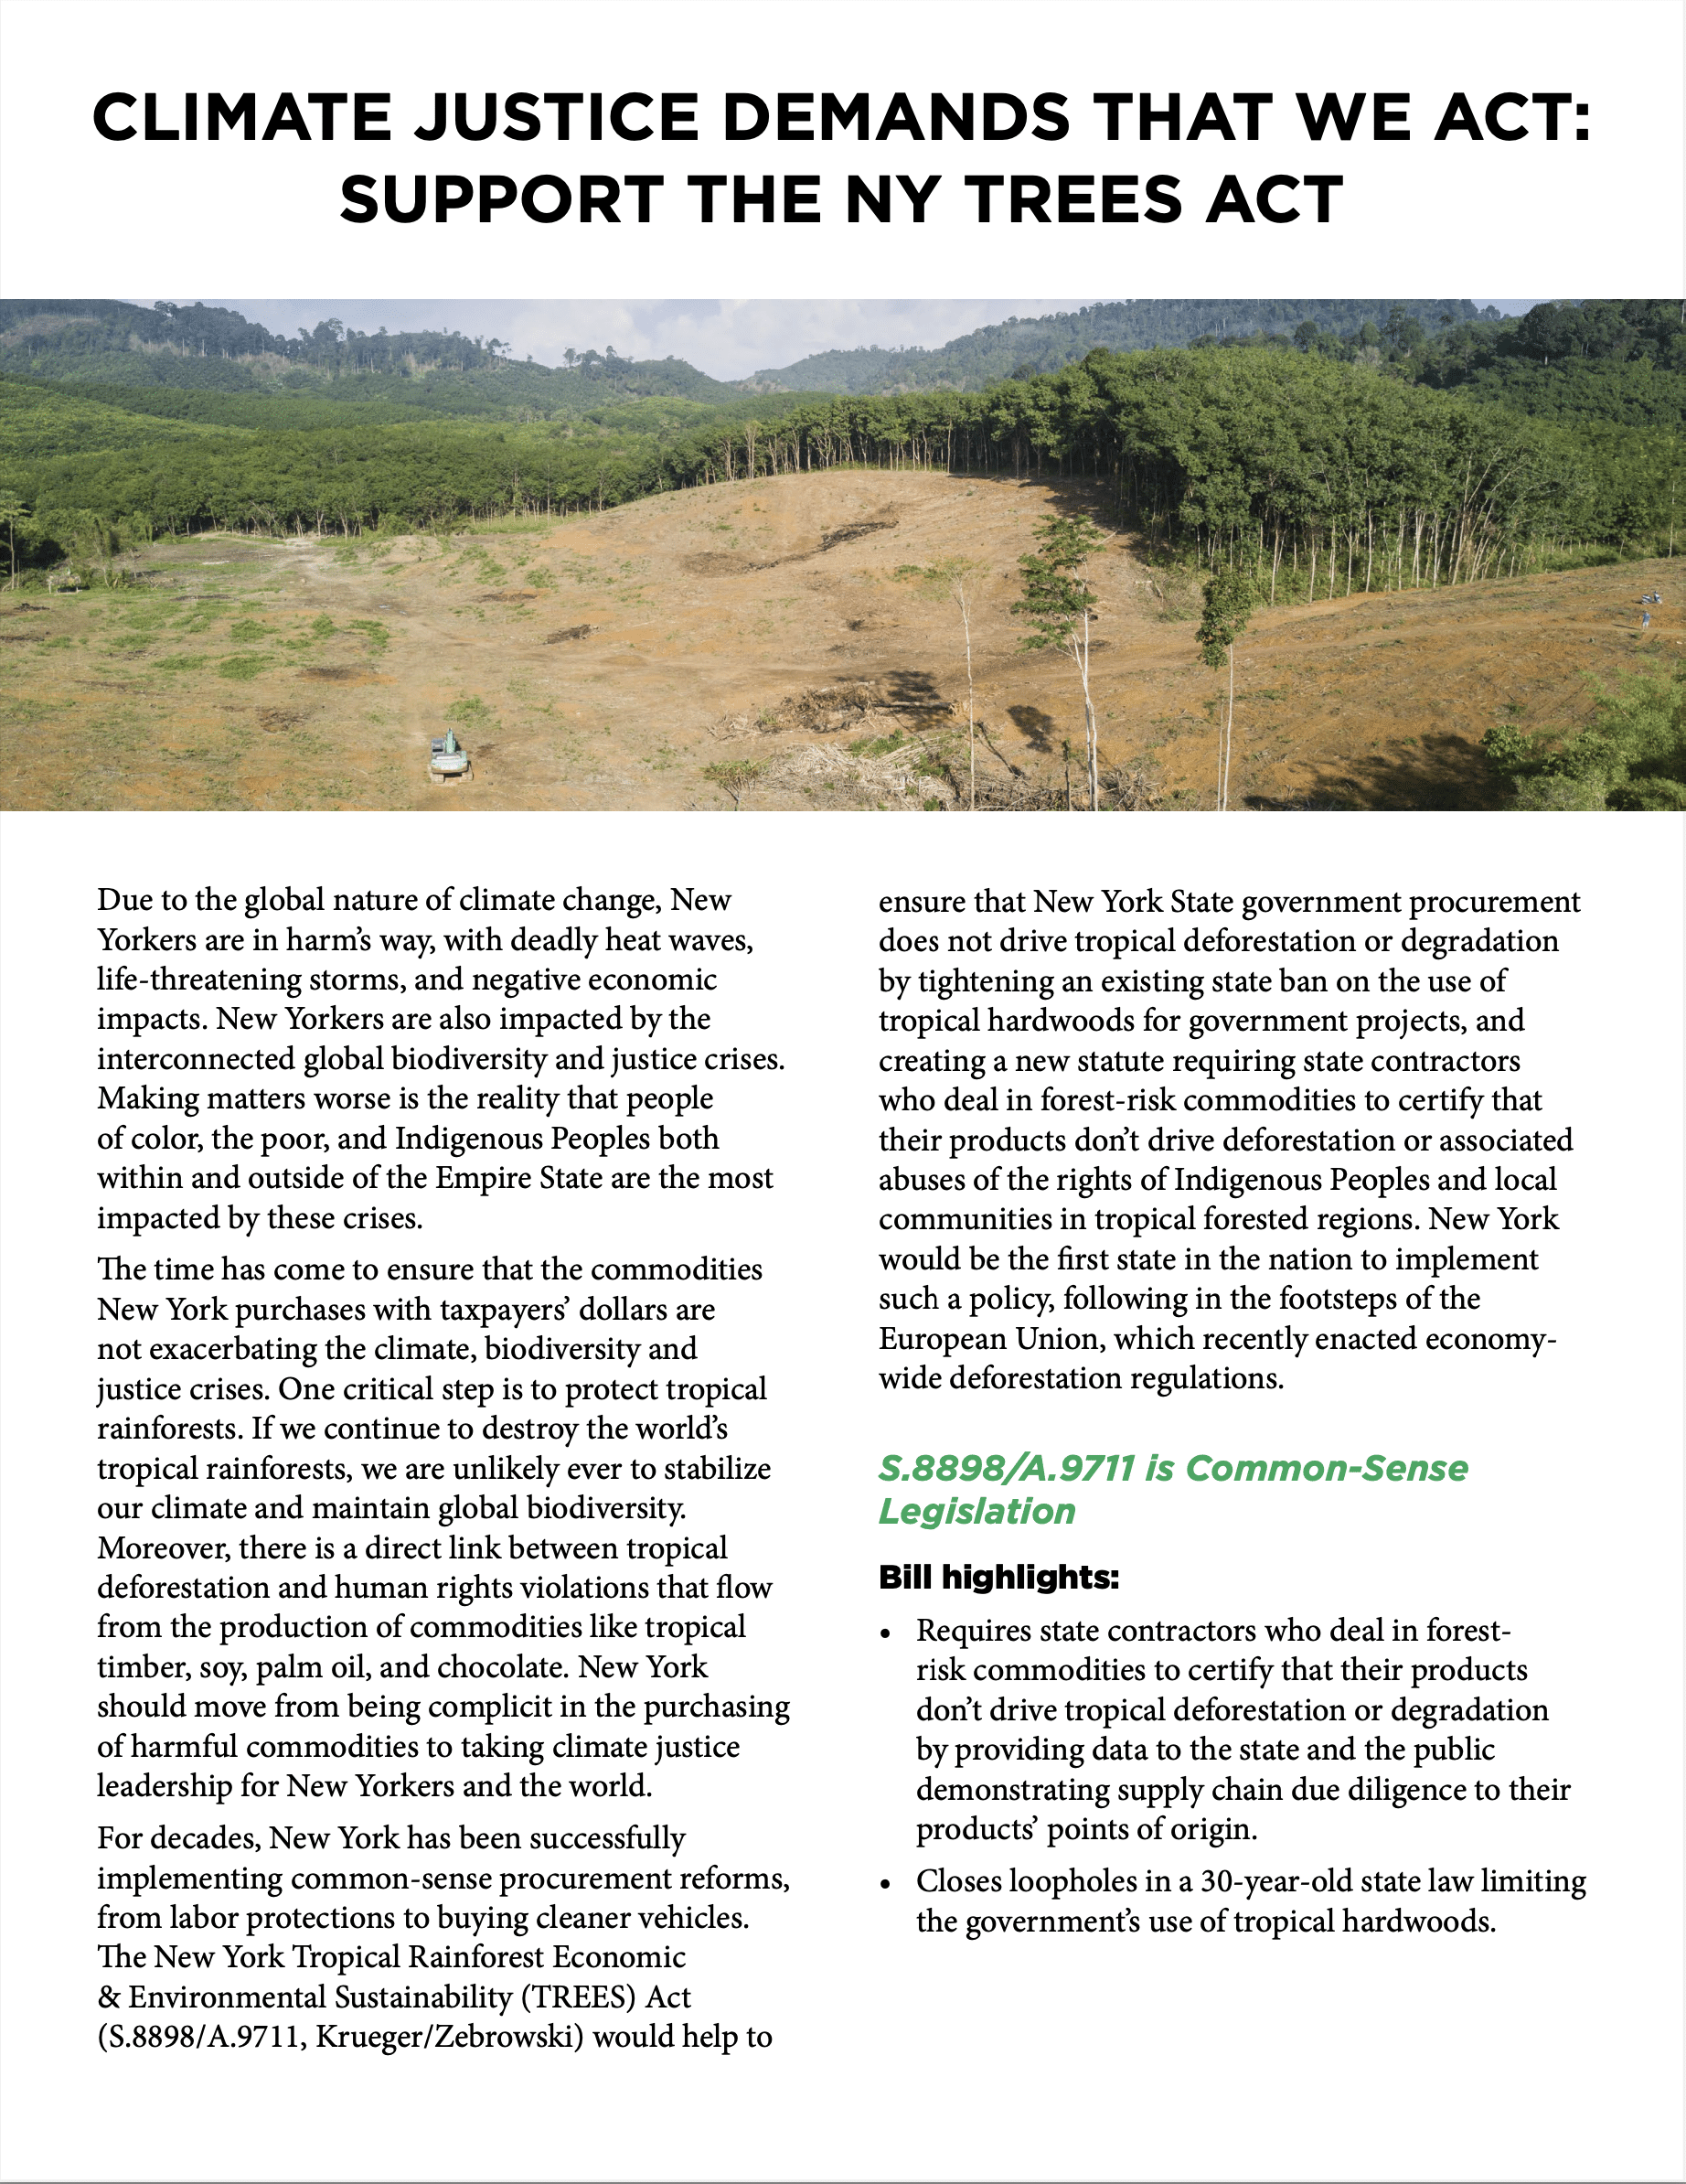 NY Tropical Deforestation-Free Procurement Act fact sheet